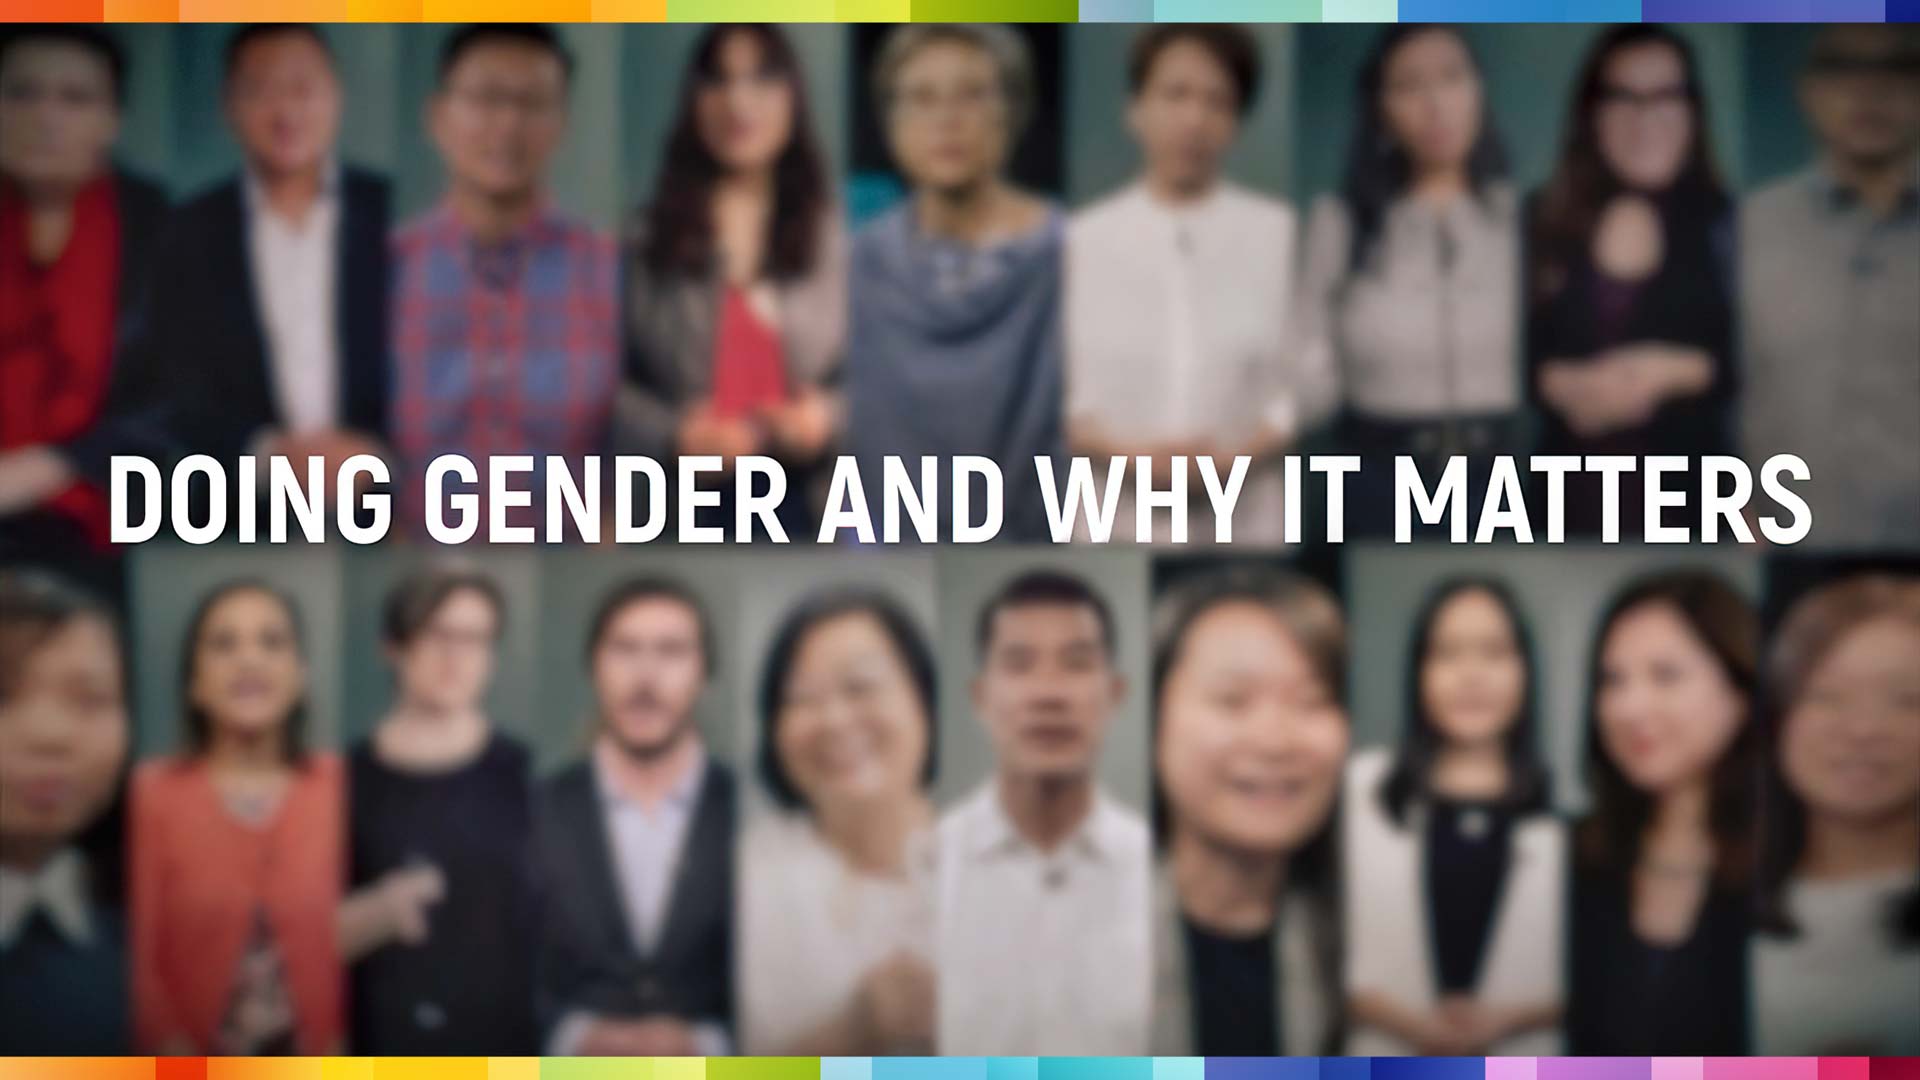 Free HKU Online Course: Doing Gender and Why it Matters